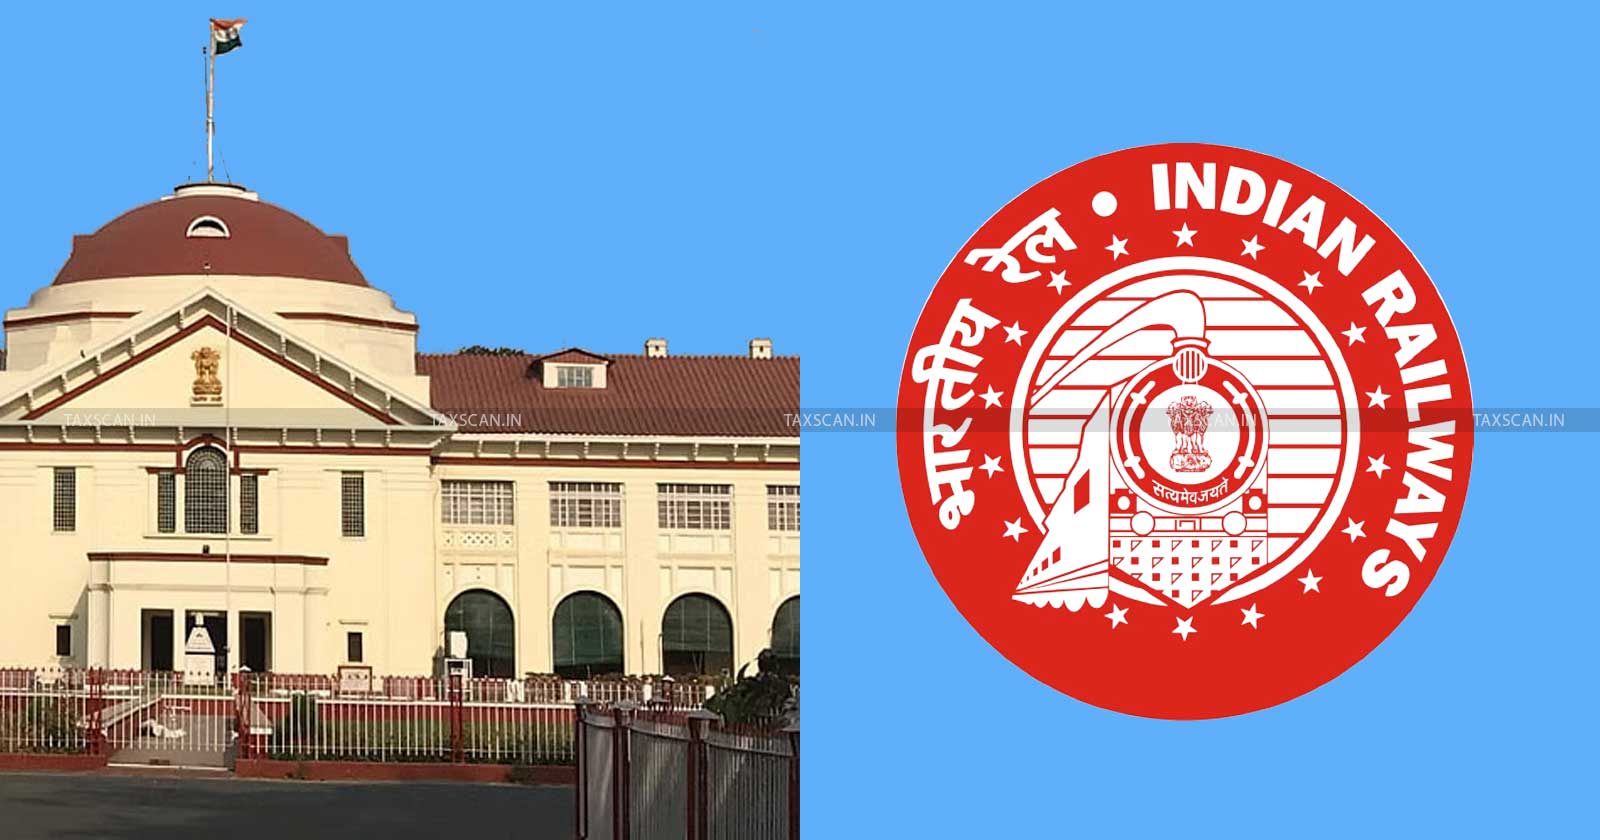 Illegal deduction - VAT - Contractors - Inter-State Sale - Goods - Patna HC - directs Railway to Refund - taxscan